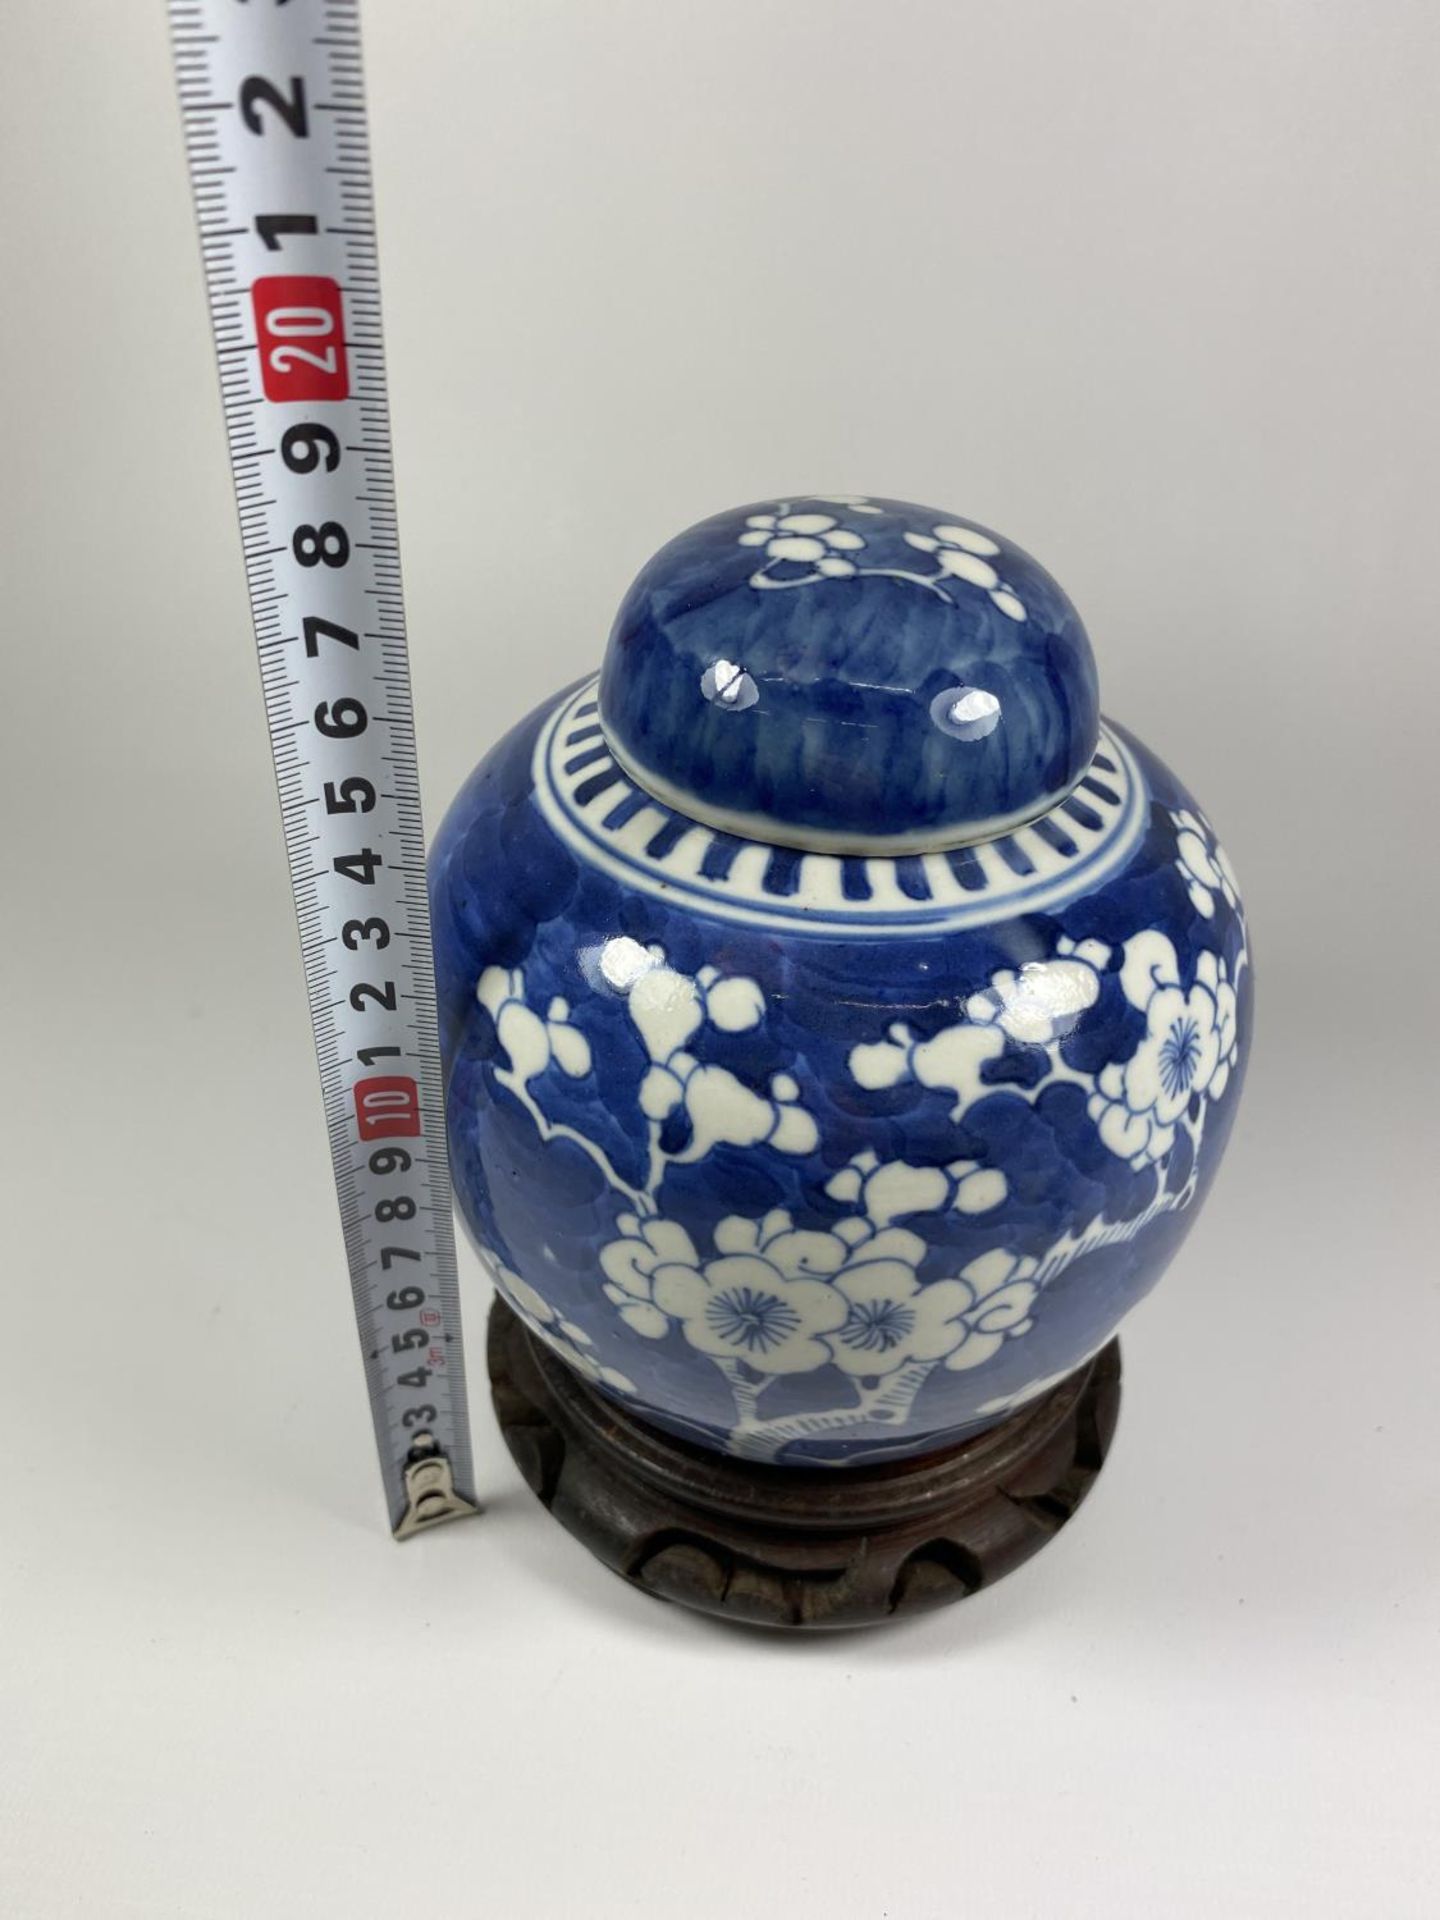 A LATE 19TH CENTURY CHINESE PORCELAIN PRUNUS BLOSSOM PATTERN GINGER JAR ON WOODEN BASE, DOUBLE - Image 7 of 7